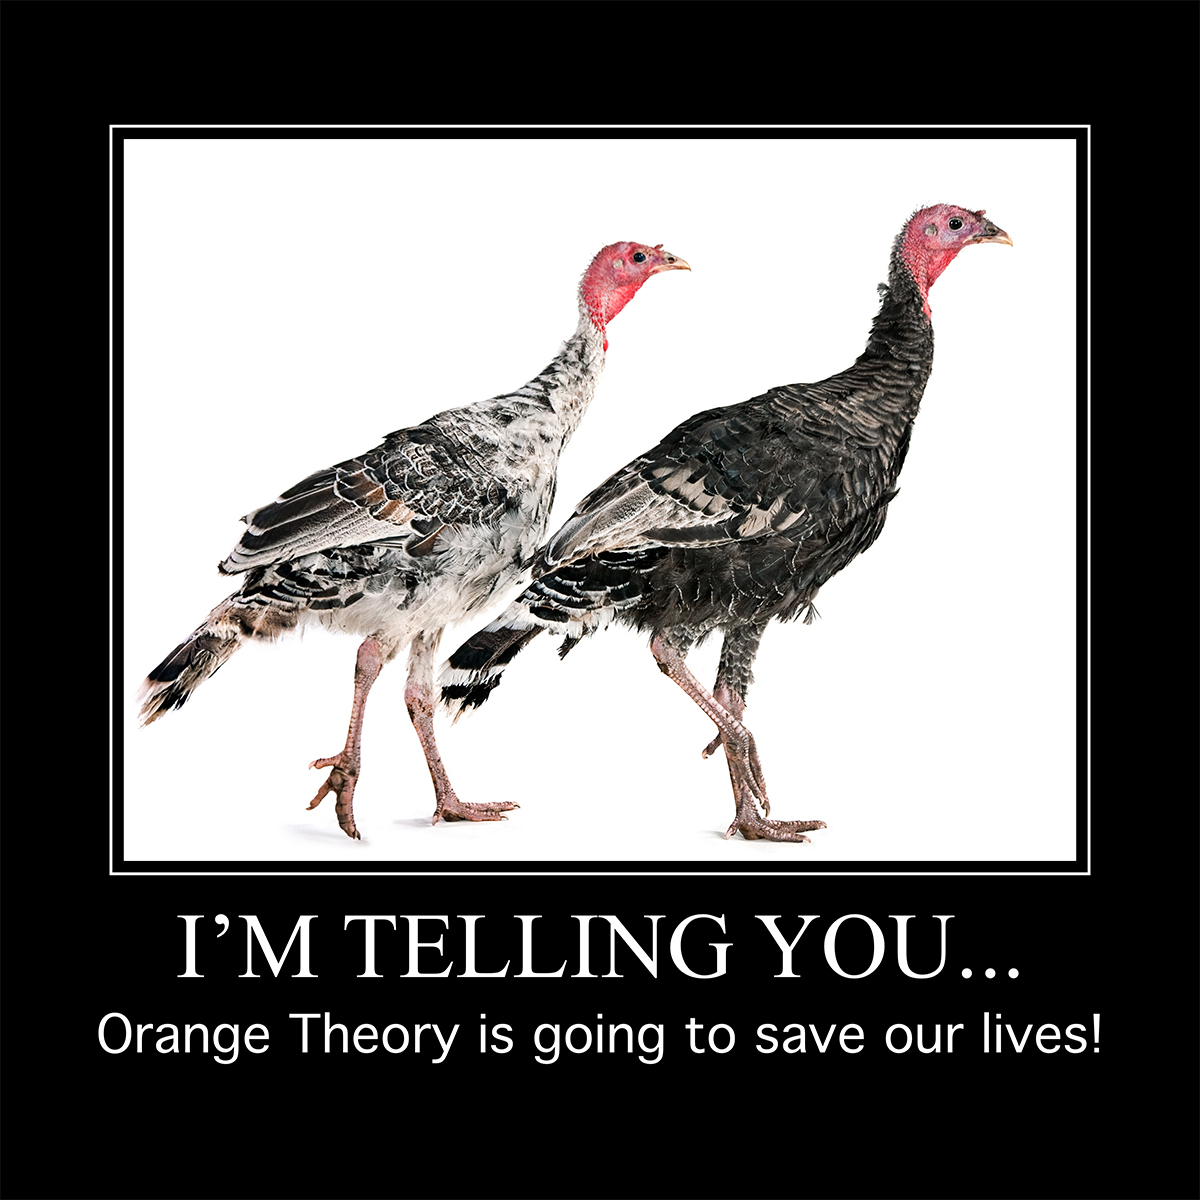 Turkey meme of two turkeys standing saying "I'm telling you... Orange Theory is going to save our lives!"